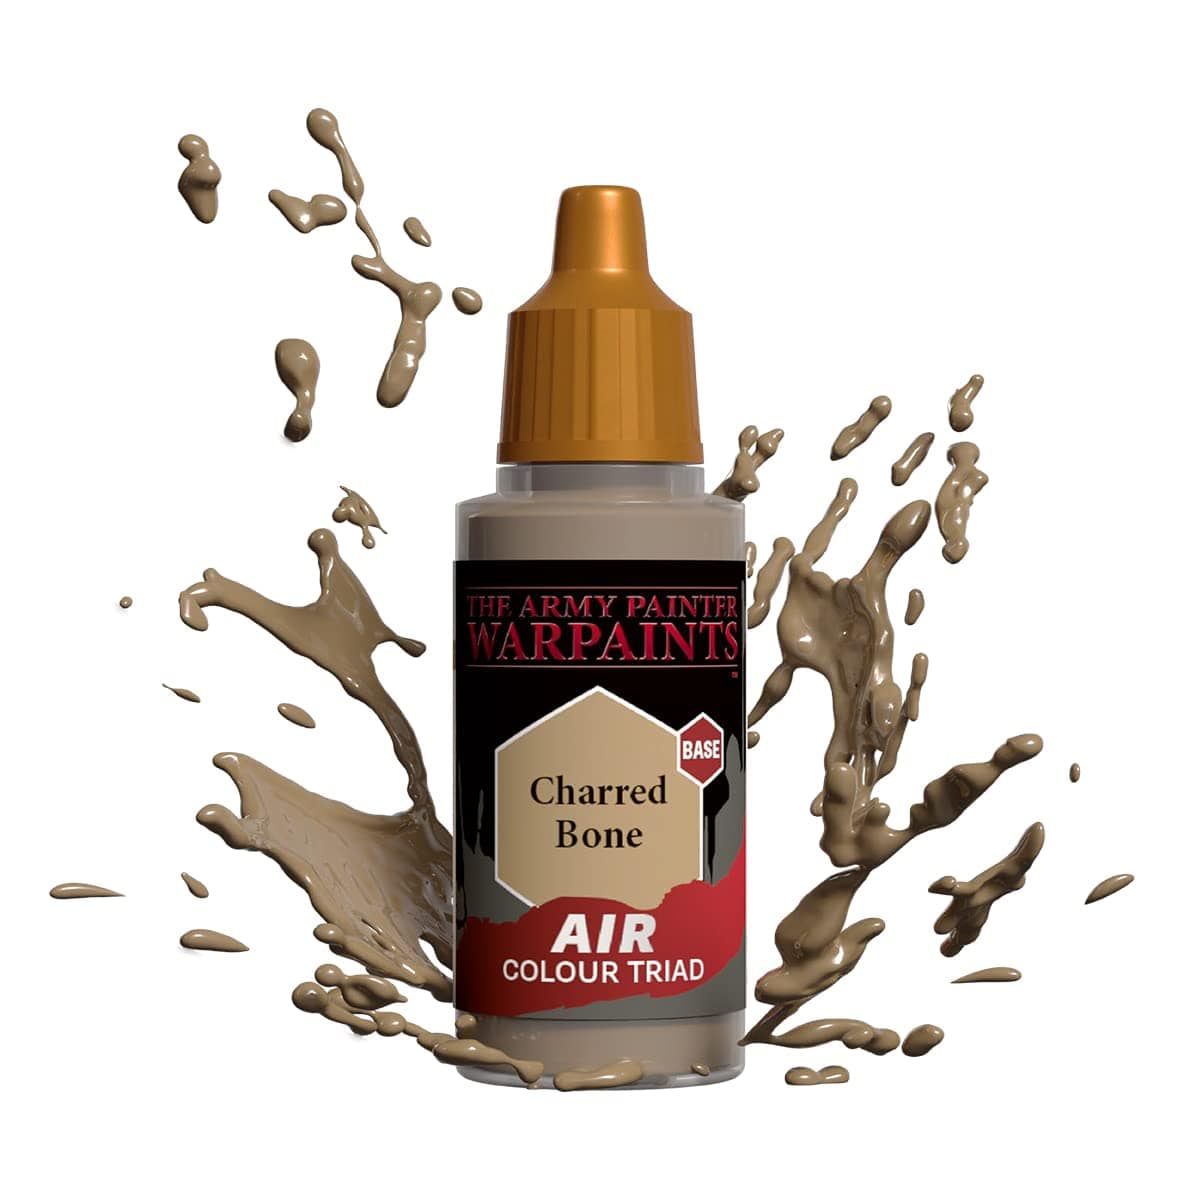 The Army Painter Accessories The Army Painter Warpaints Air: Charred Bone 18ml